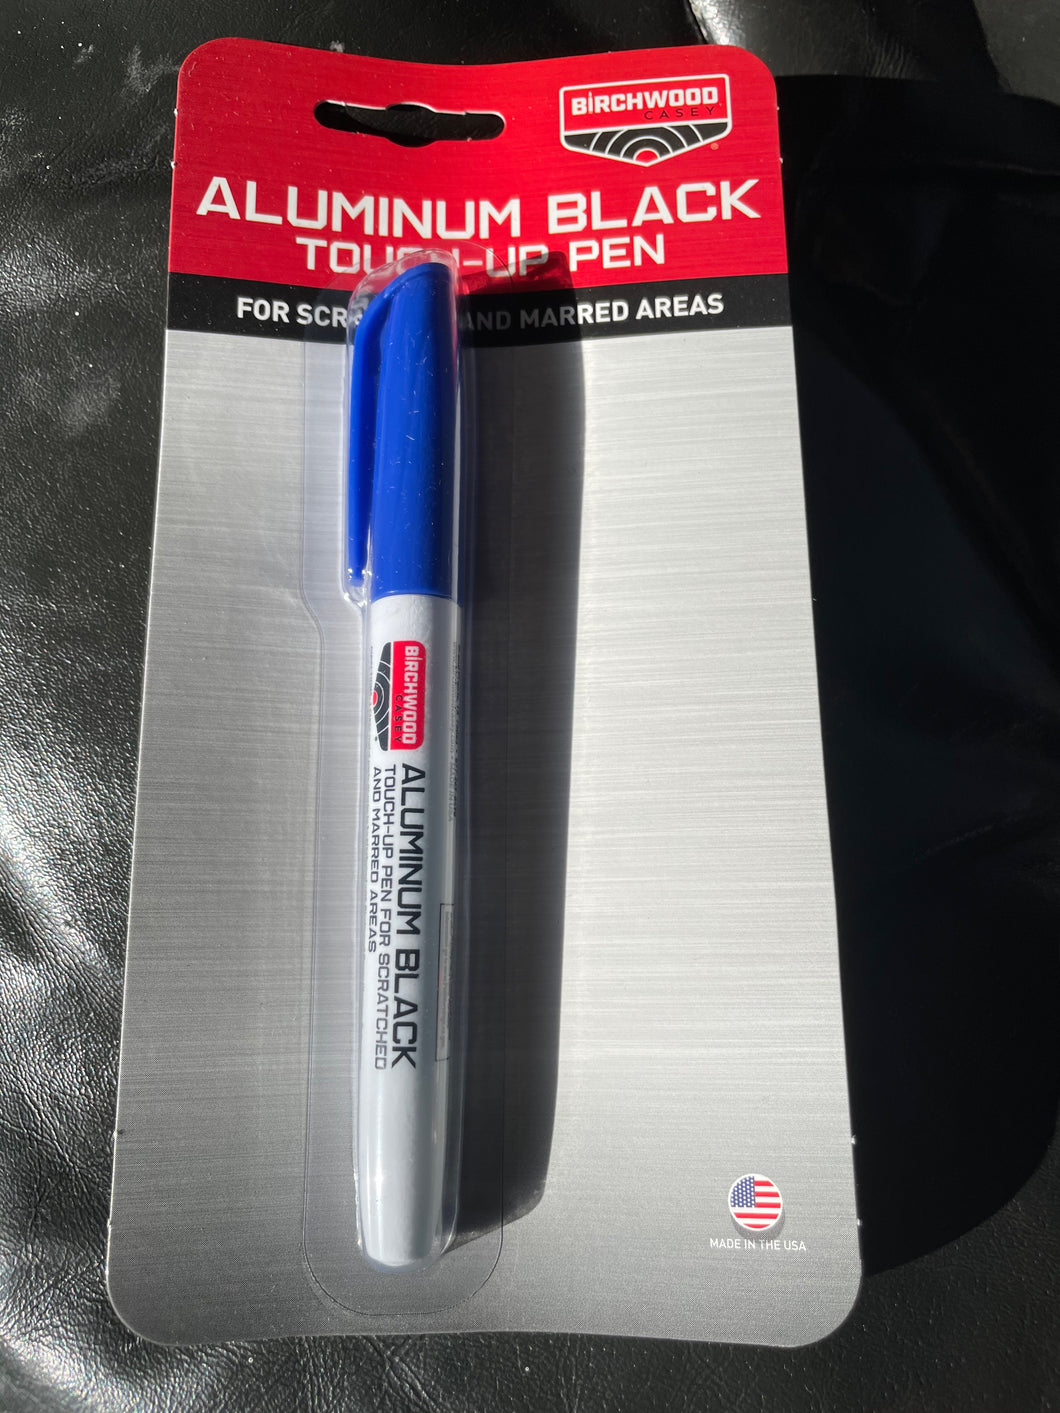 Oh the magic in a Birchwood Casey aluminum black touch up pen : r/SigSauer